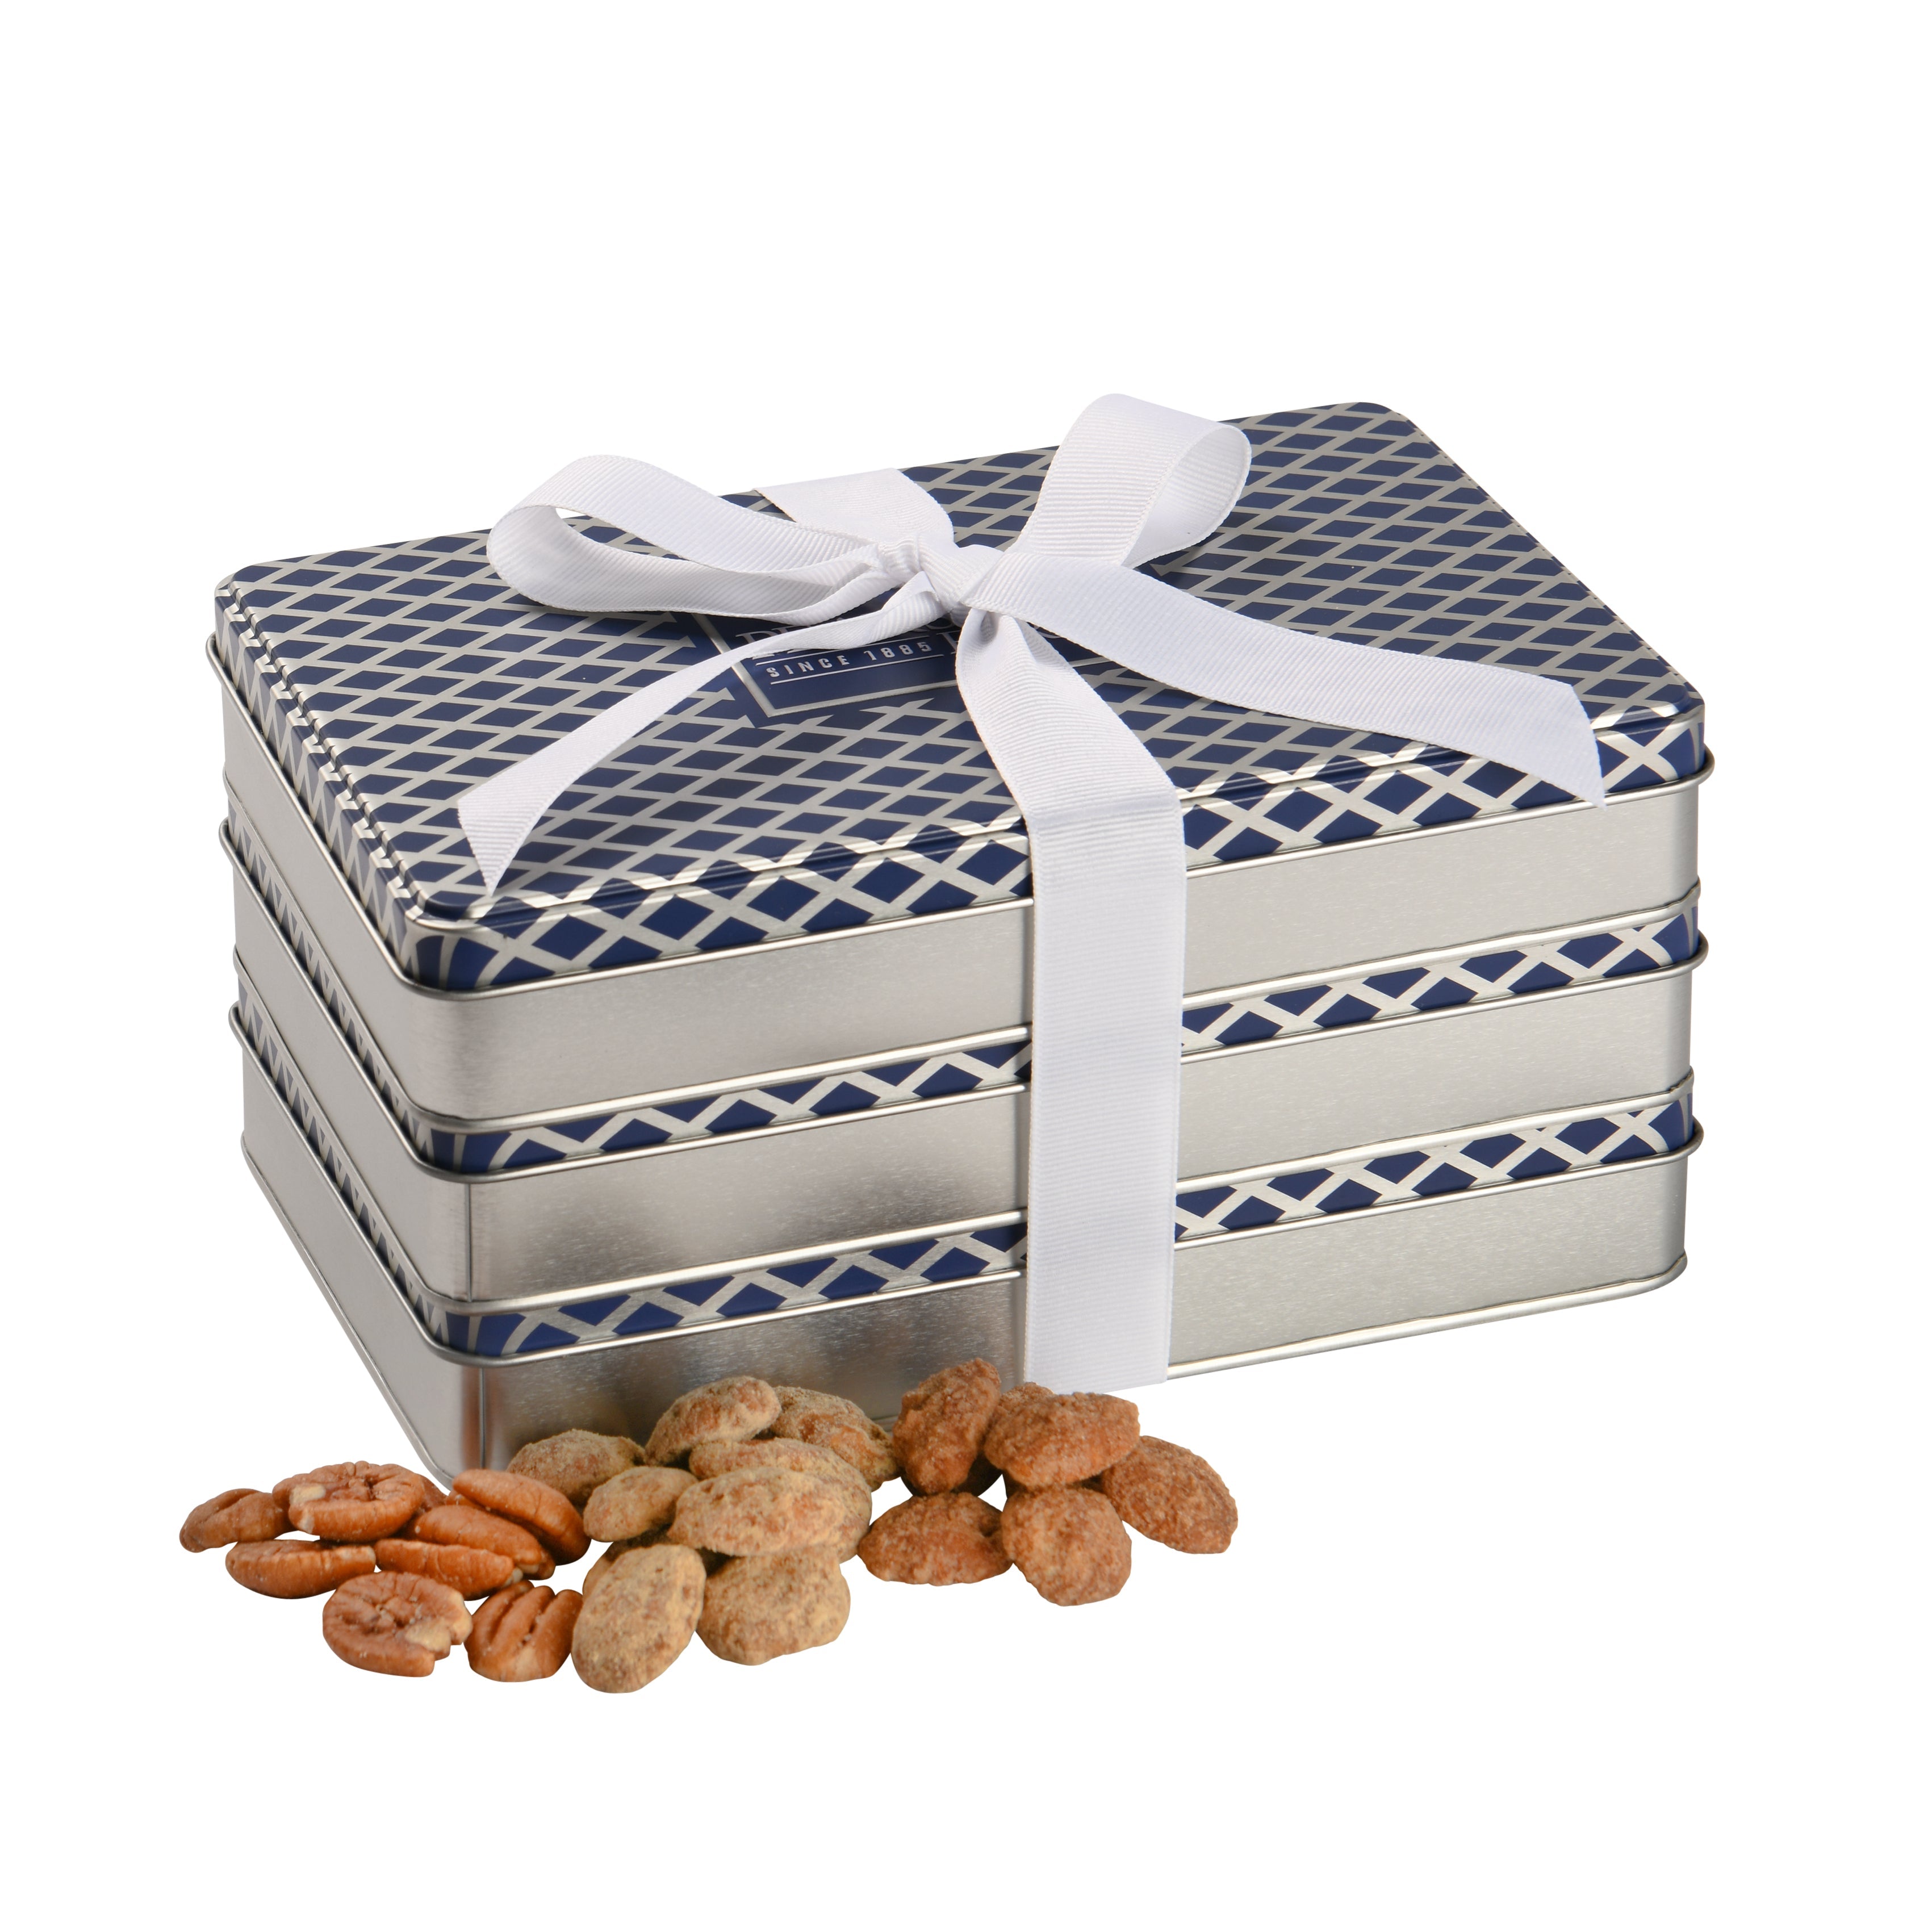 Starbucks Variety Gift Crate - Currently Unavailable | e-CorporateGifts.com